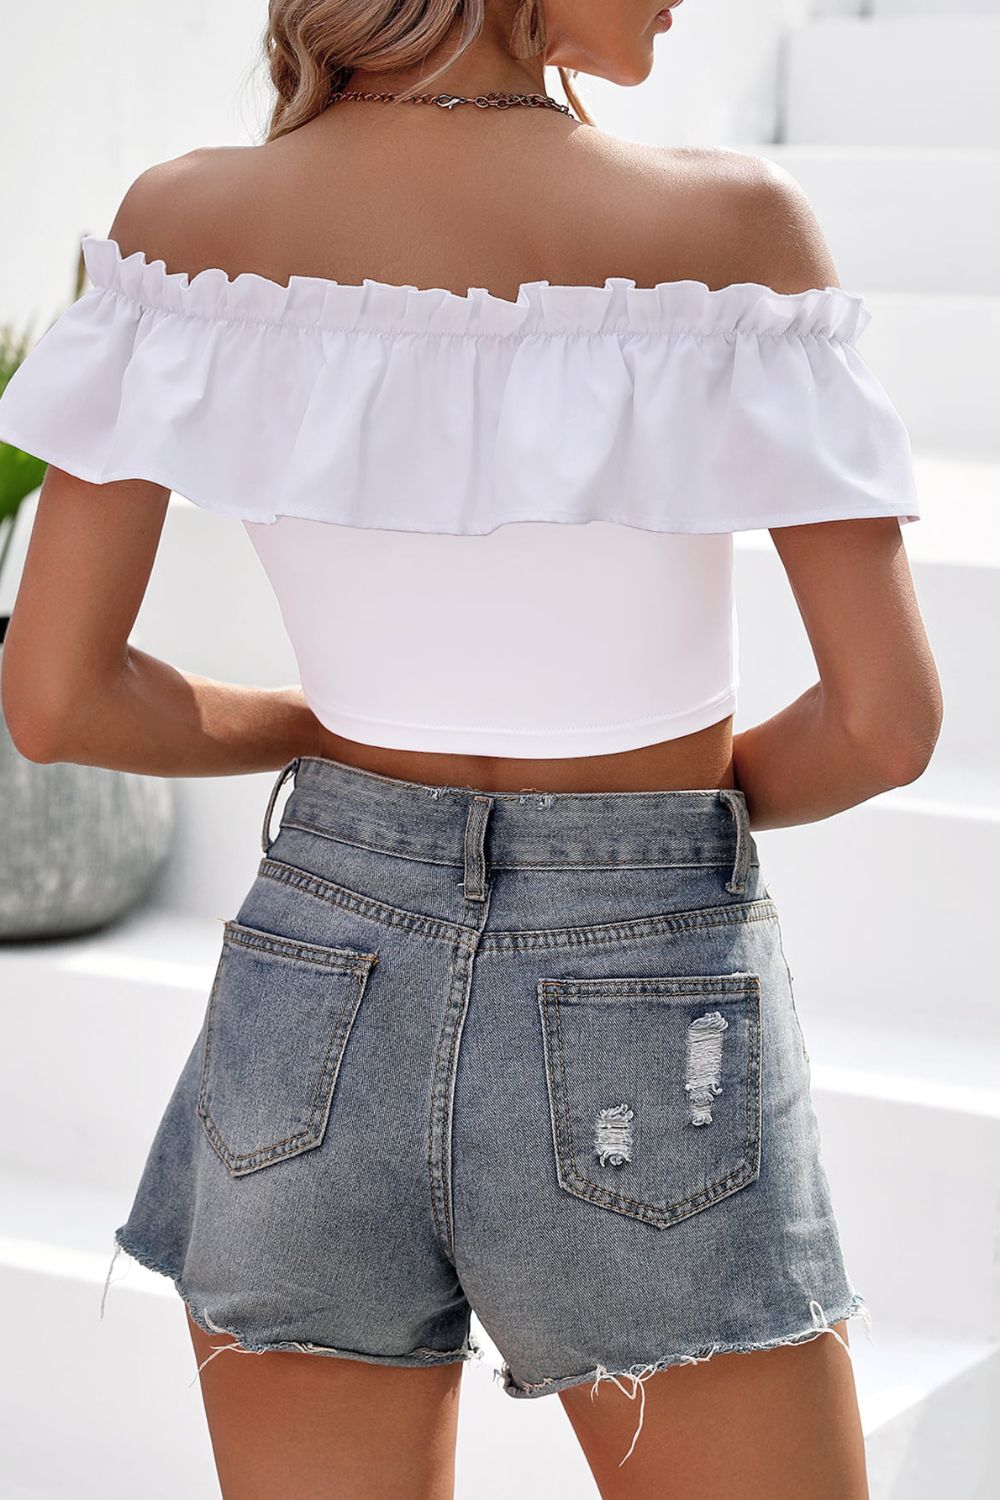 Watermelon Crawl Off-Shoulder Ruffled Cropped Top